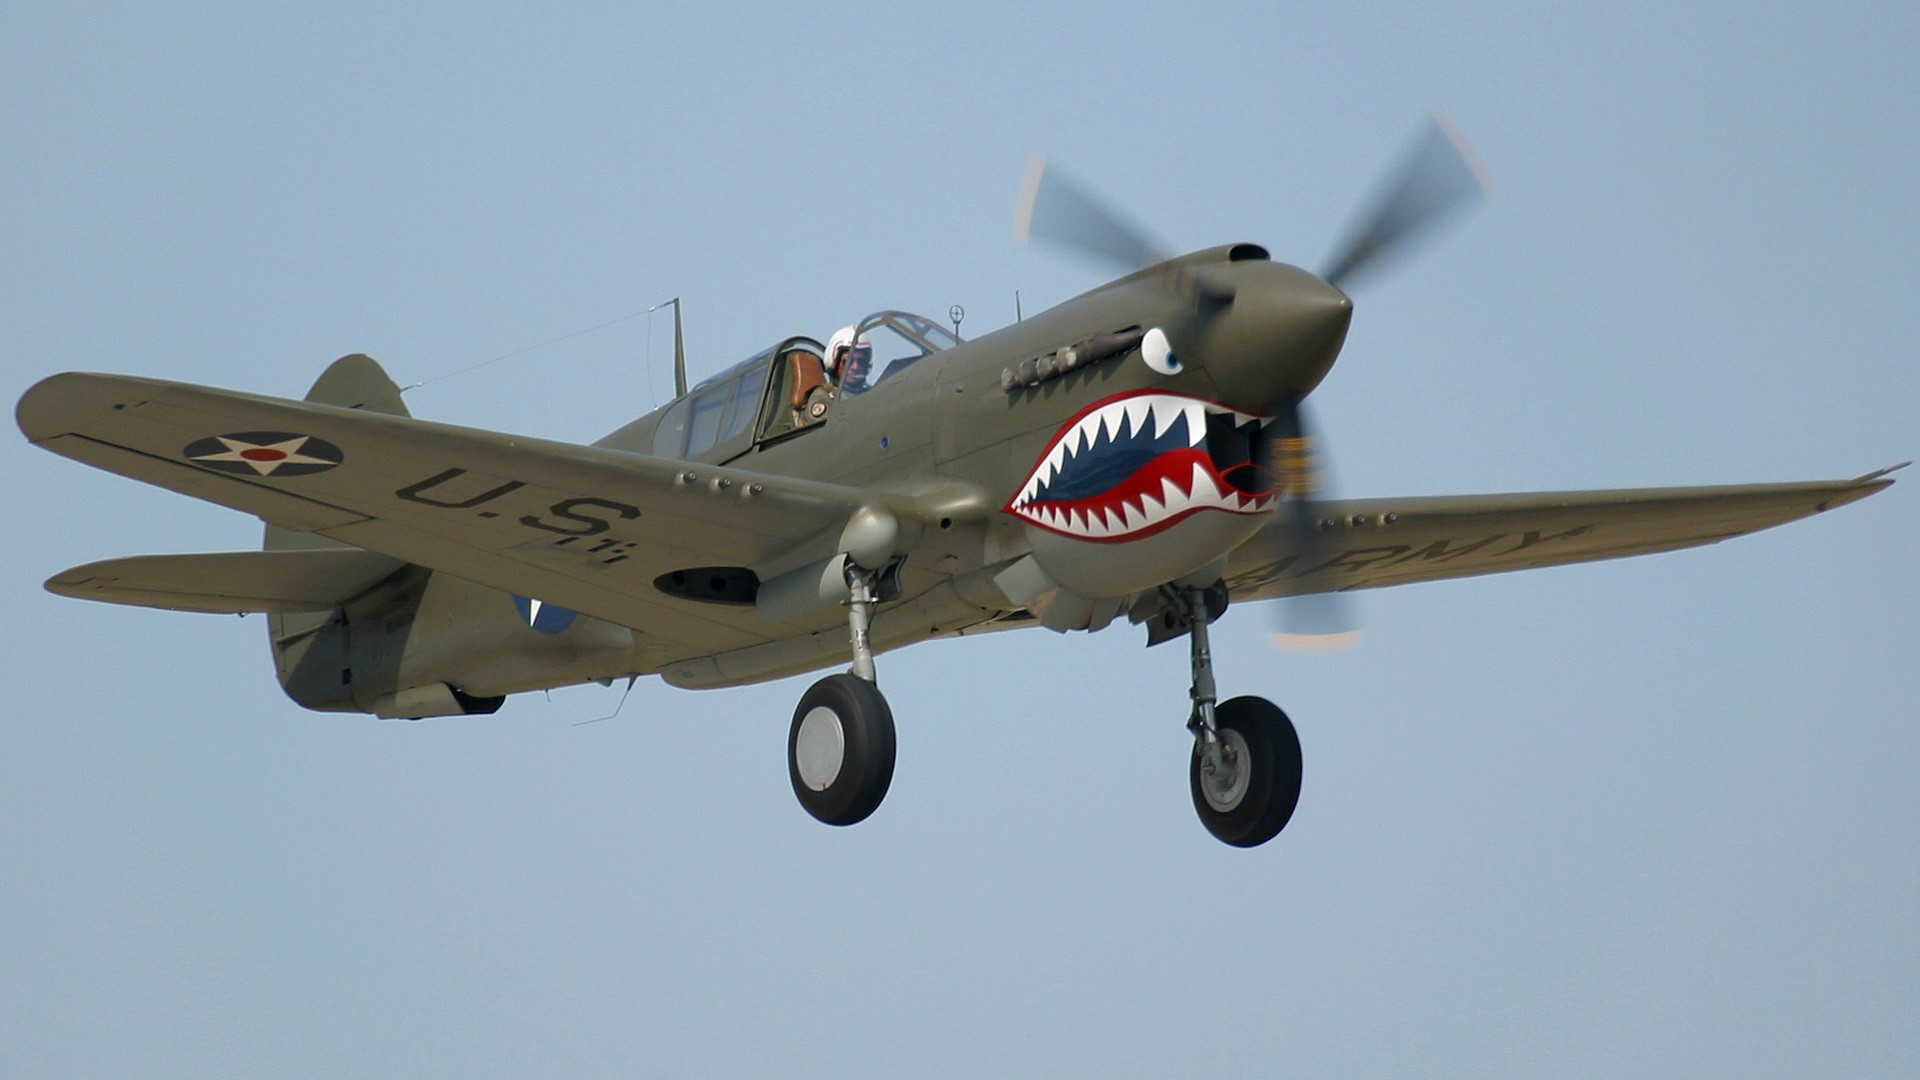 1920x1080 P40 Warhawk photographed at the Oshkosh AirVenture 2002 airshow using a  Canon D60 digital camera and ...